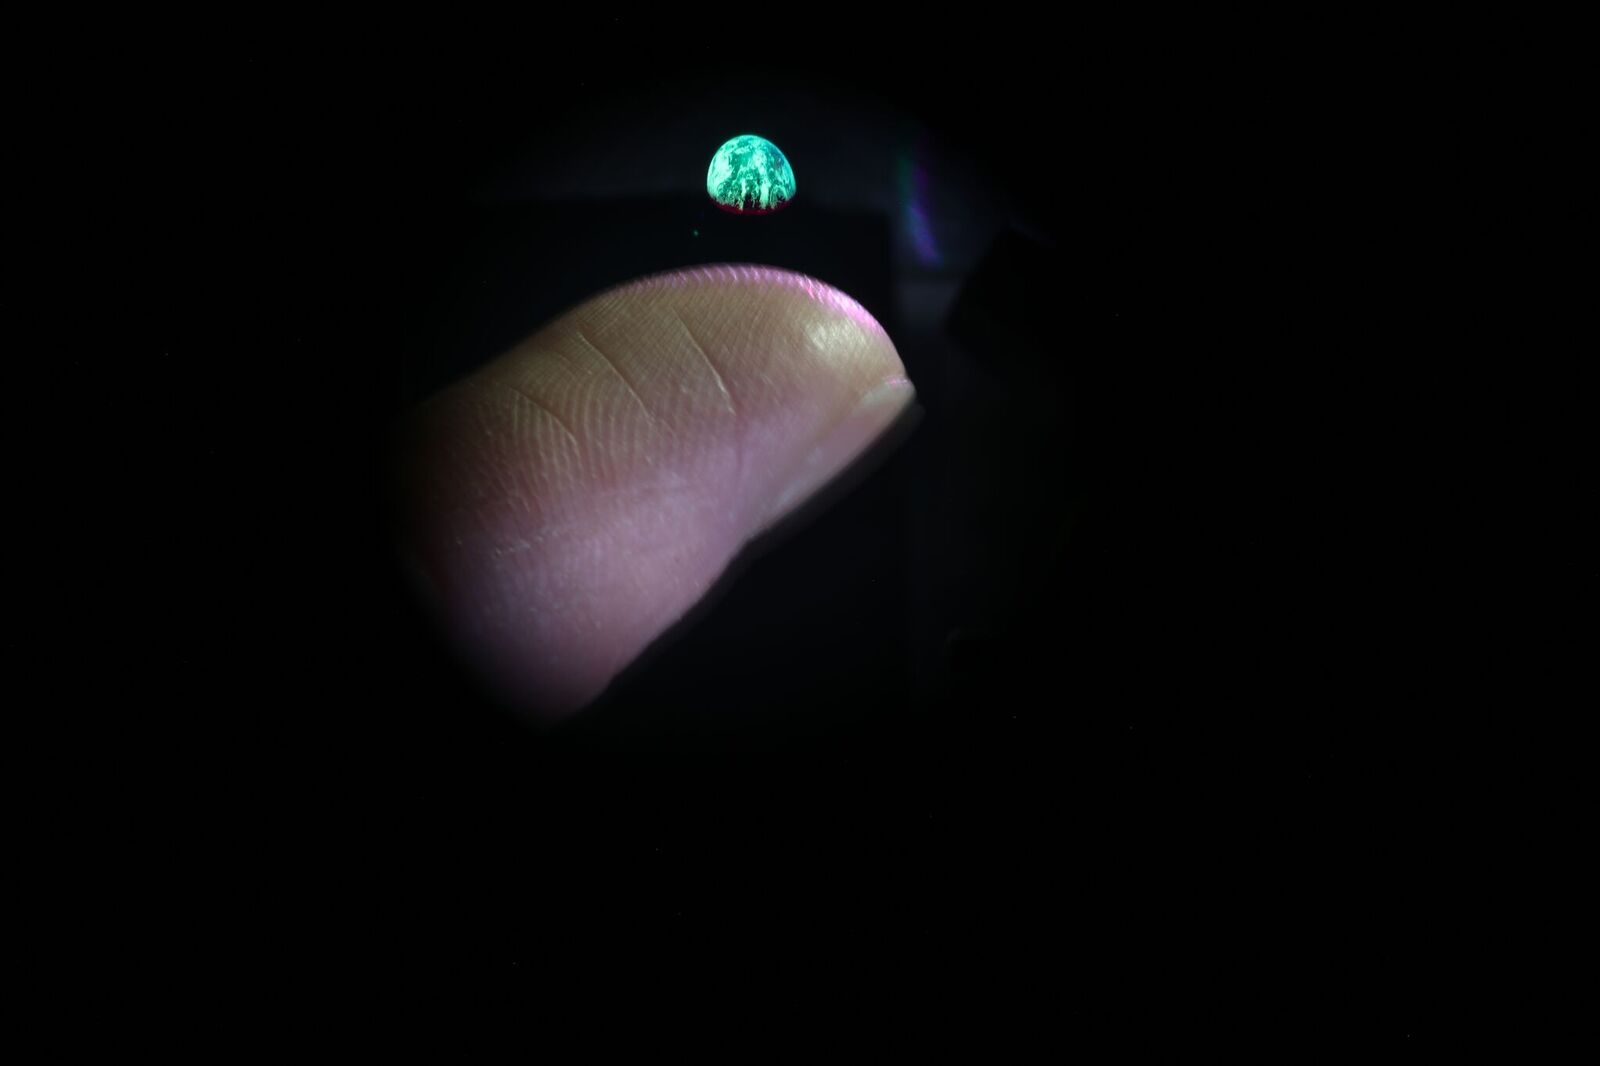 3D image of earth volumetric display hovering above finger